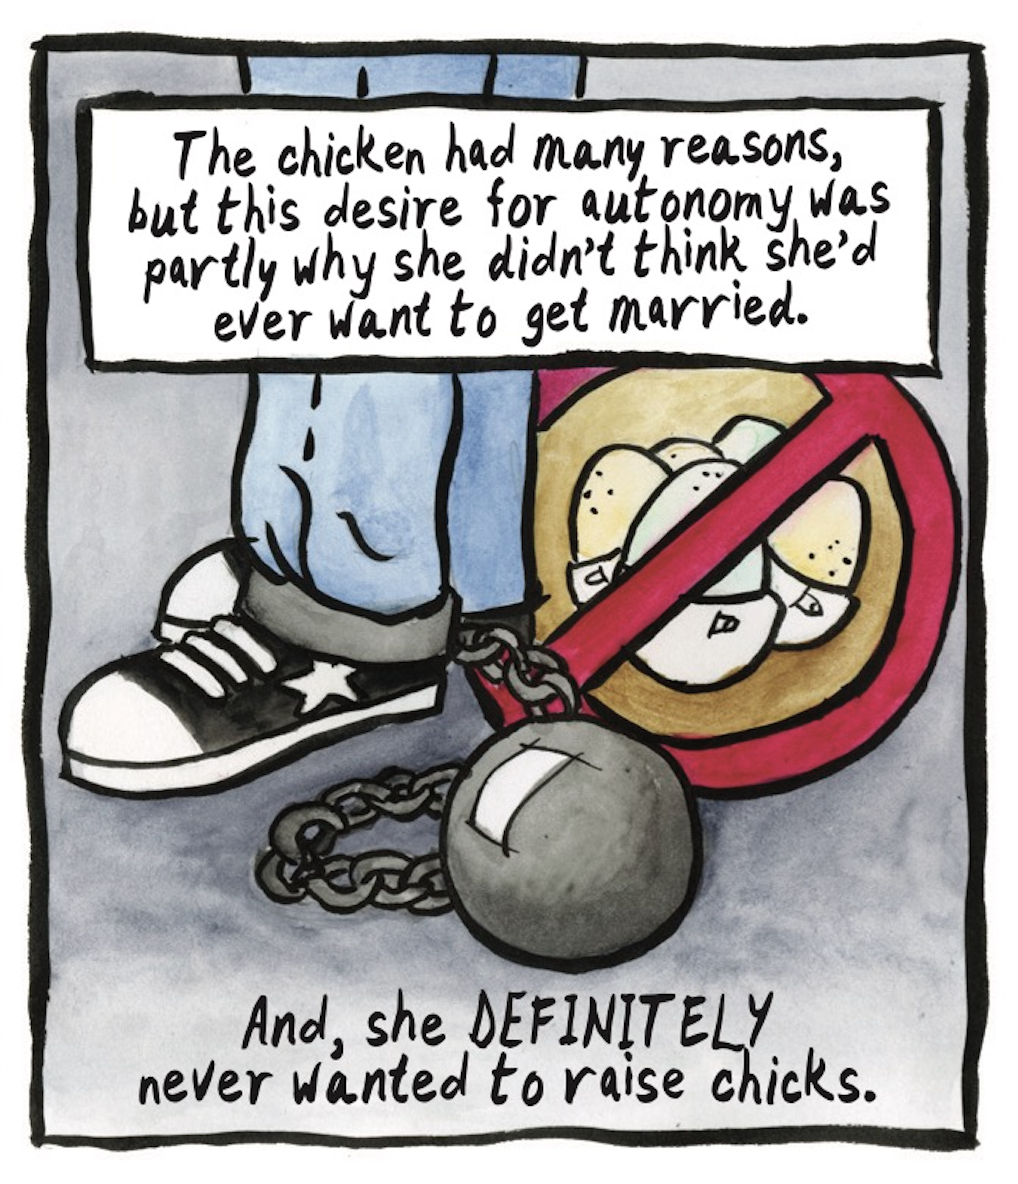 â€œThe chicken had many reasons, but this desire for autonomy was partly why she didnâ€™t think sheâ€™d ever want to get married. And, she DEFINITELY never wanted to raise chicks.â€ Legs of someone wearing Converse-like shoes, with a ball and chain attached to their ankle. Next to it is a red no symbol containing eggs wearing diapers.